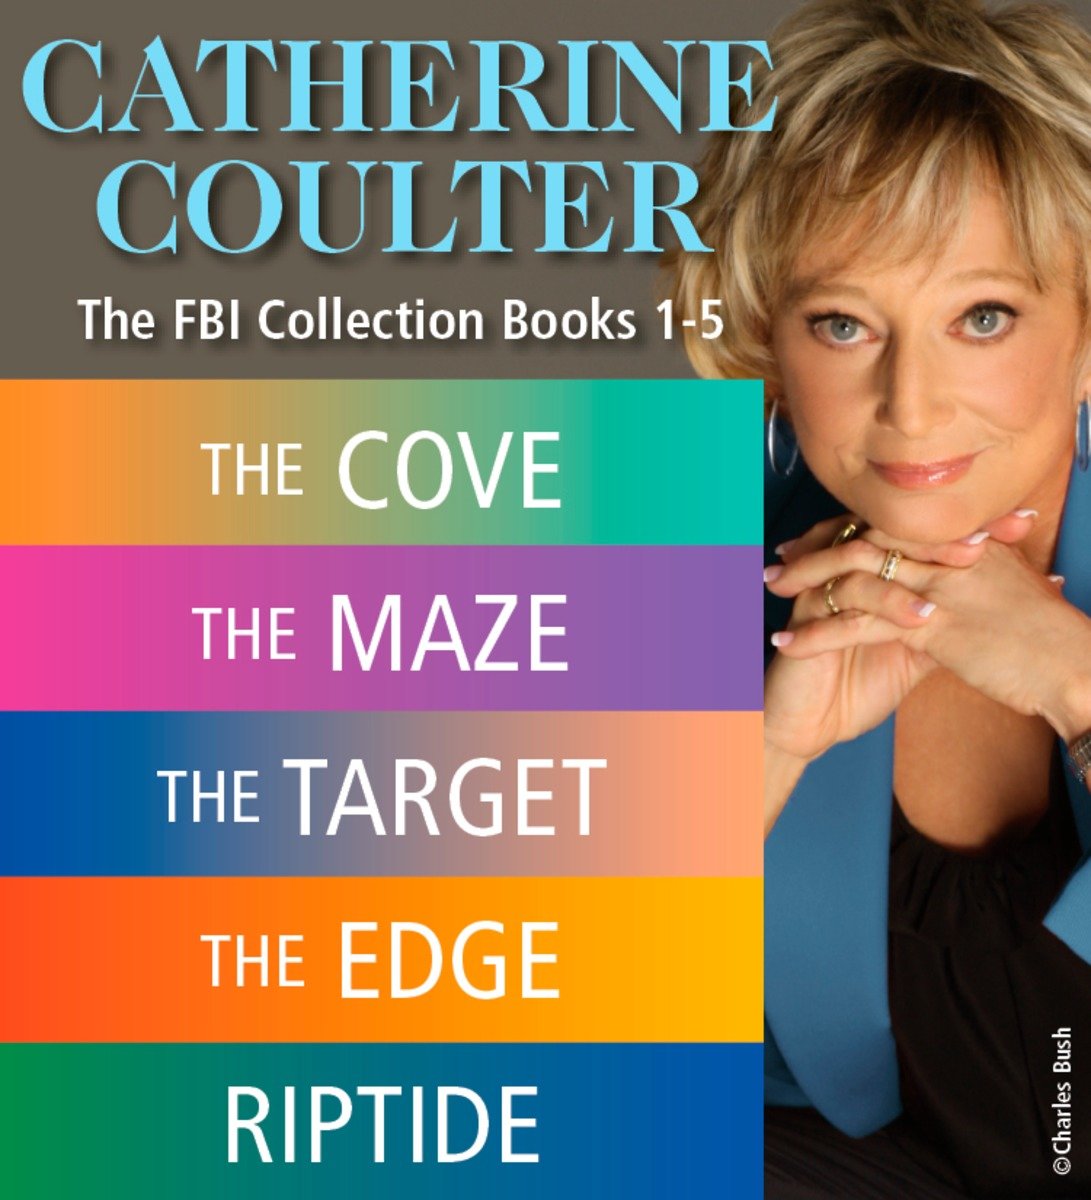 Umschlagbild für Catherine Coulter THE FBI THRILLERS COLLECTION Books 1-5 [electronic resource] :